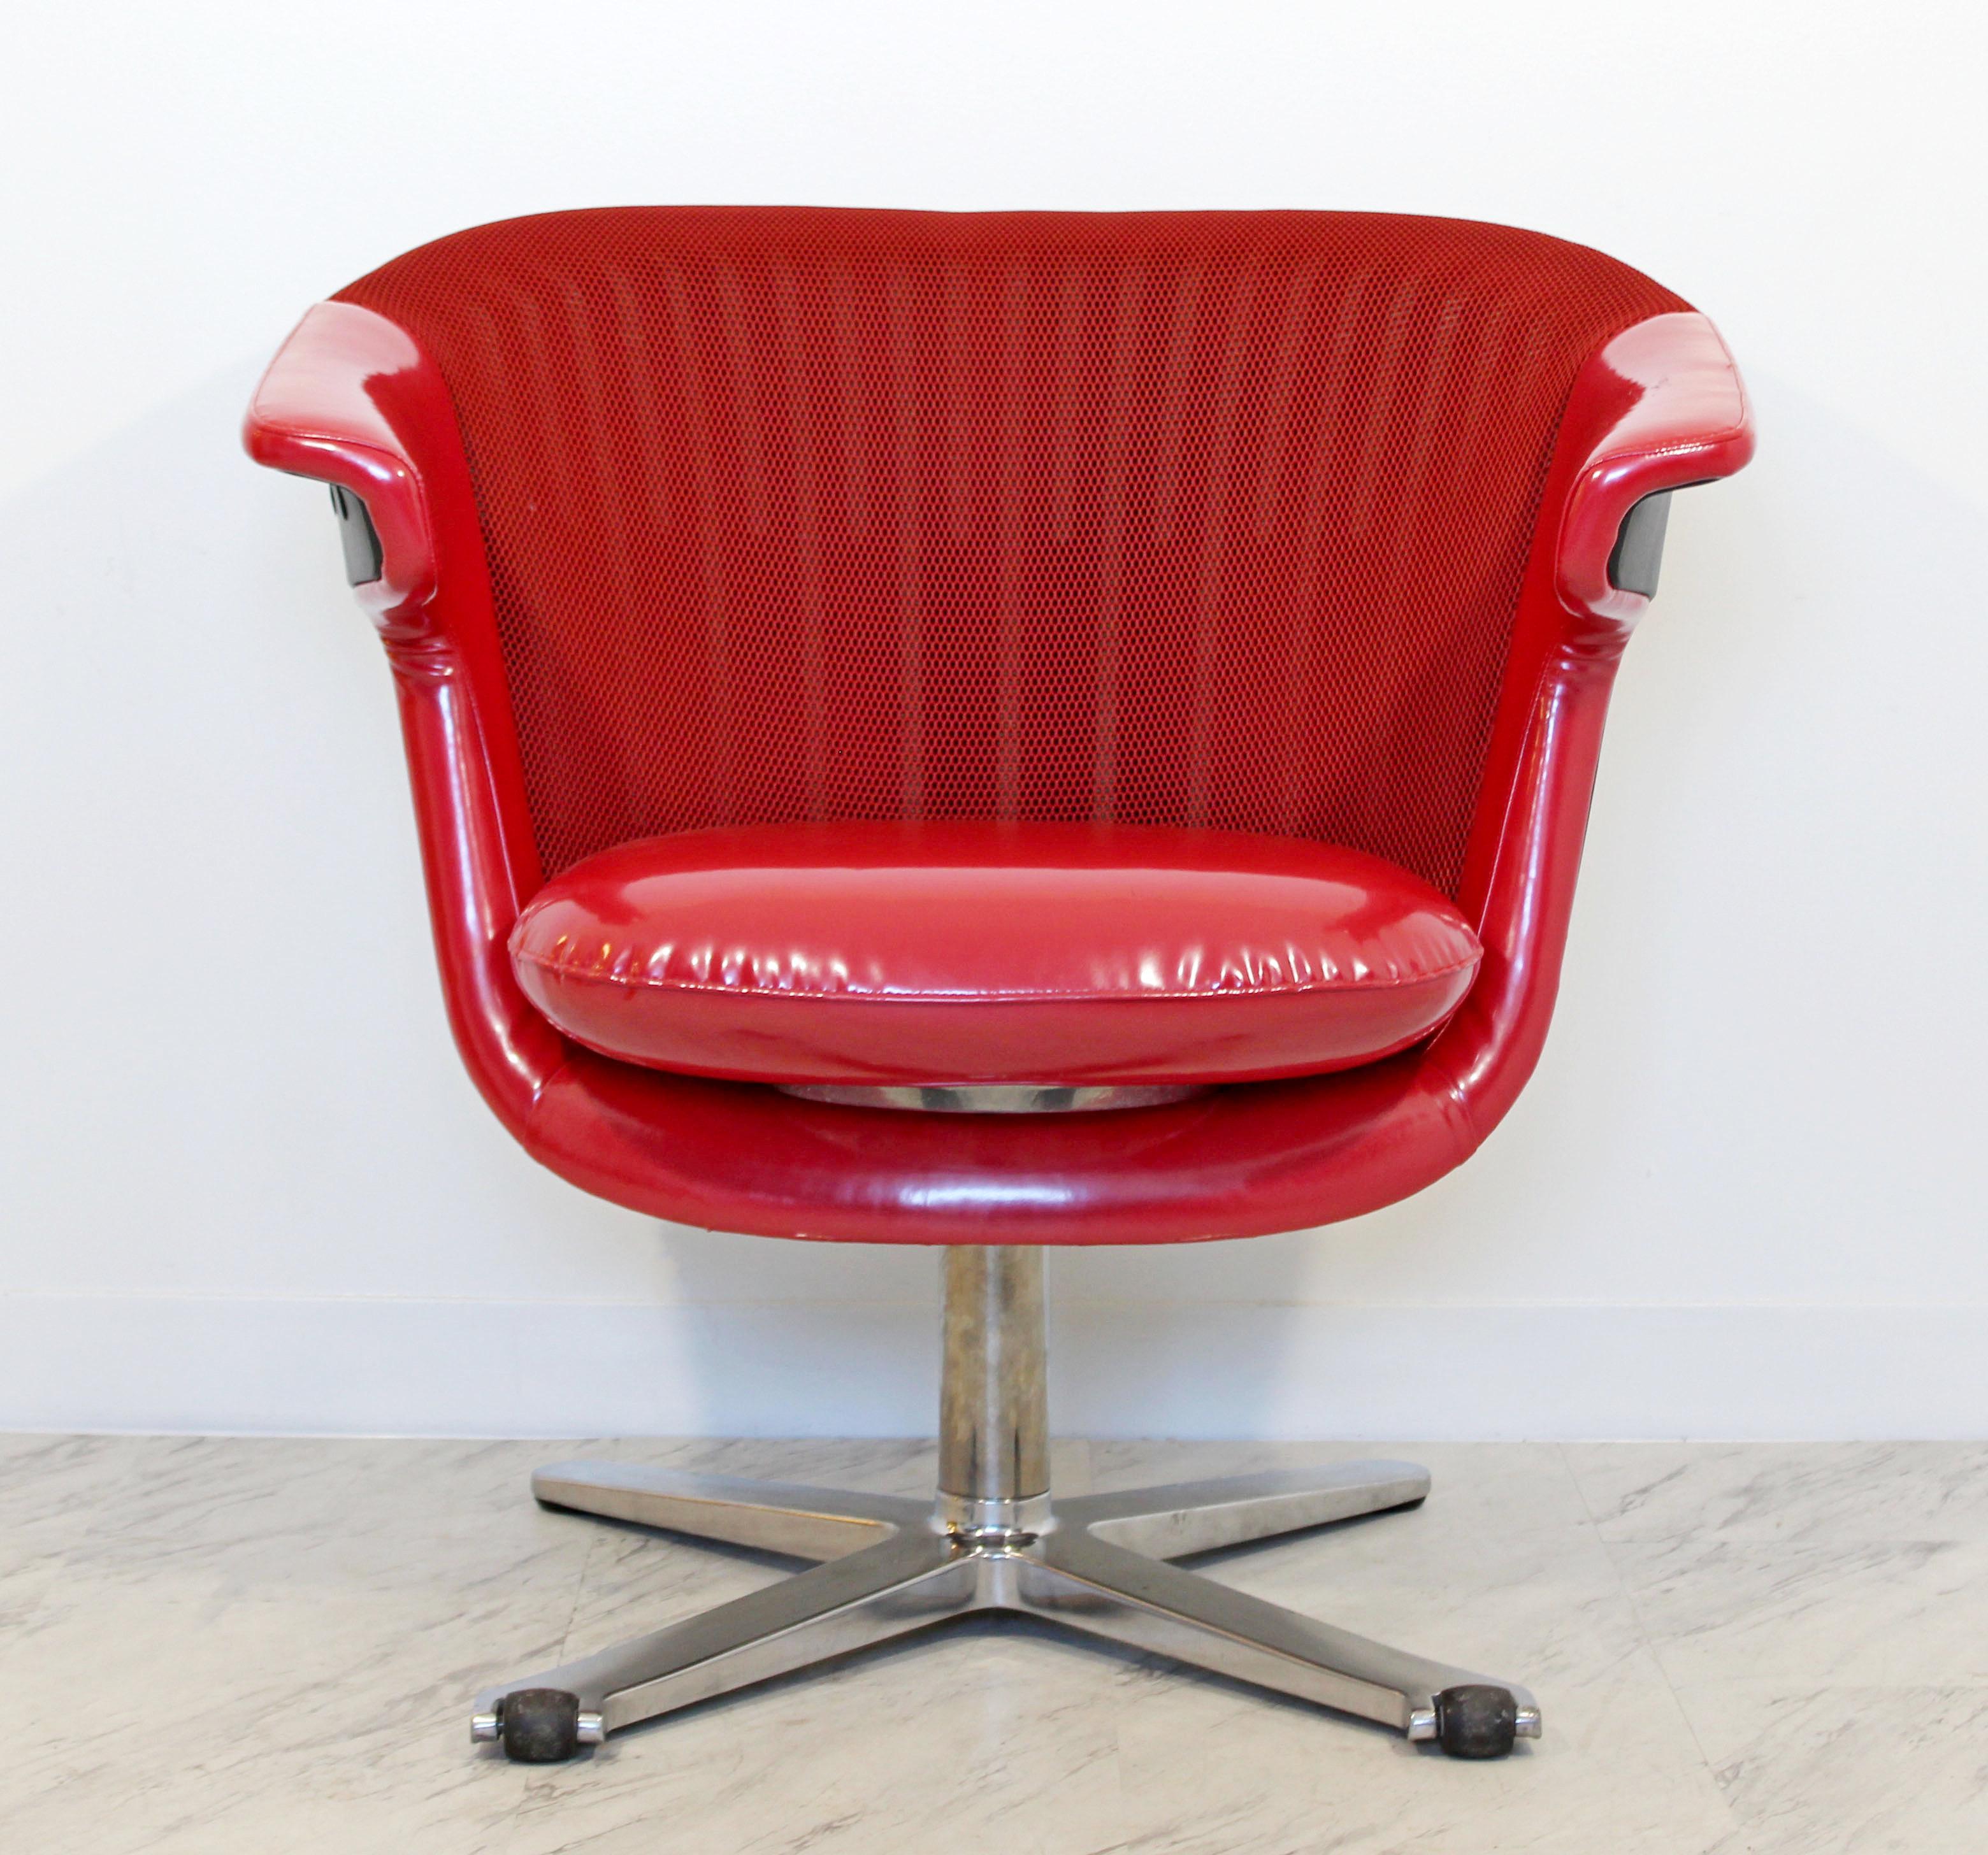 For your consideration is a fantastic, i2i, ergonomically shaped, swivel office chair, with red mesh and vinyl upholstery, by Steelcase. In excellent condition. The dimensions of the chair are 32